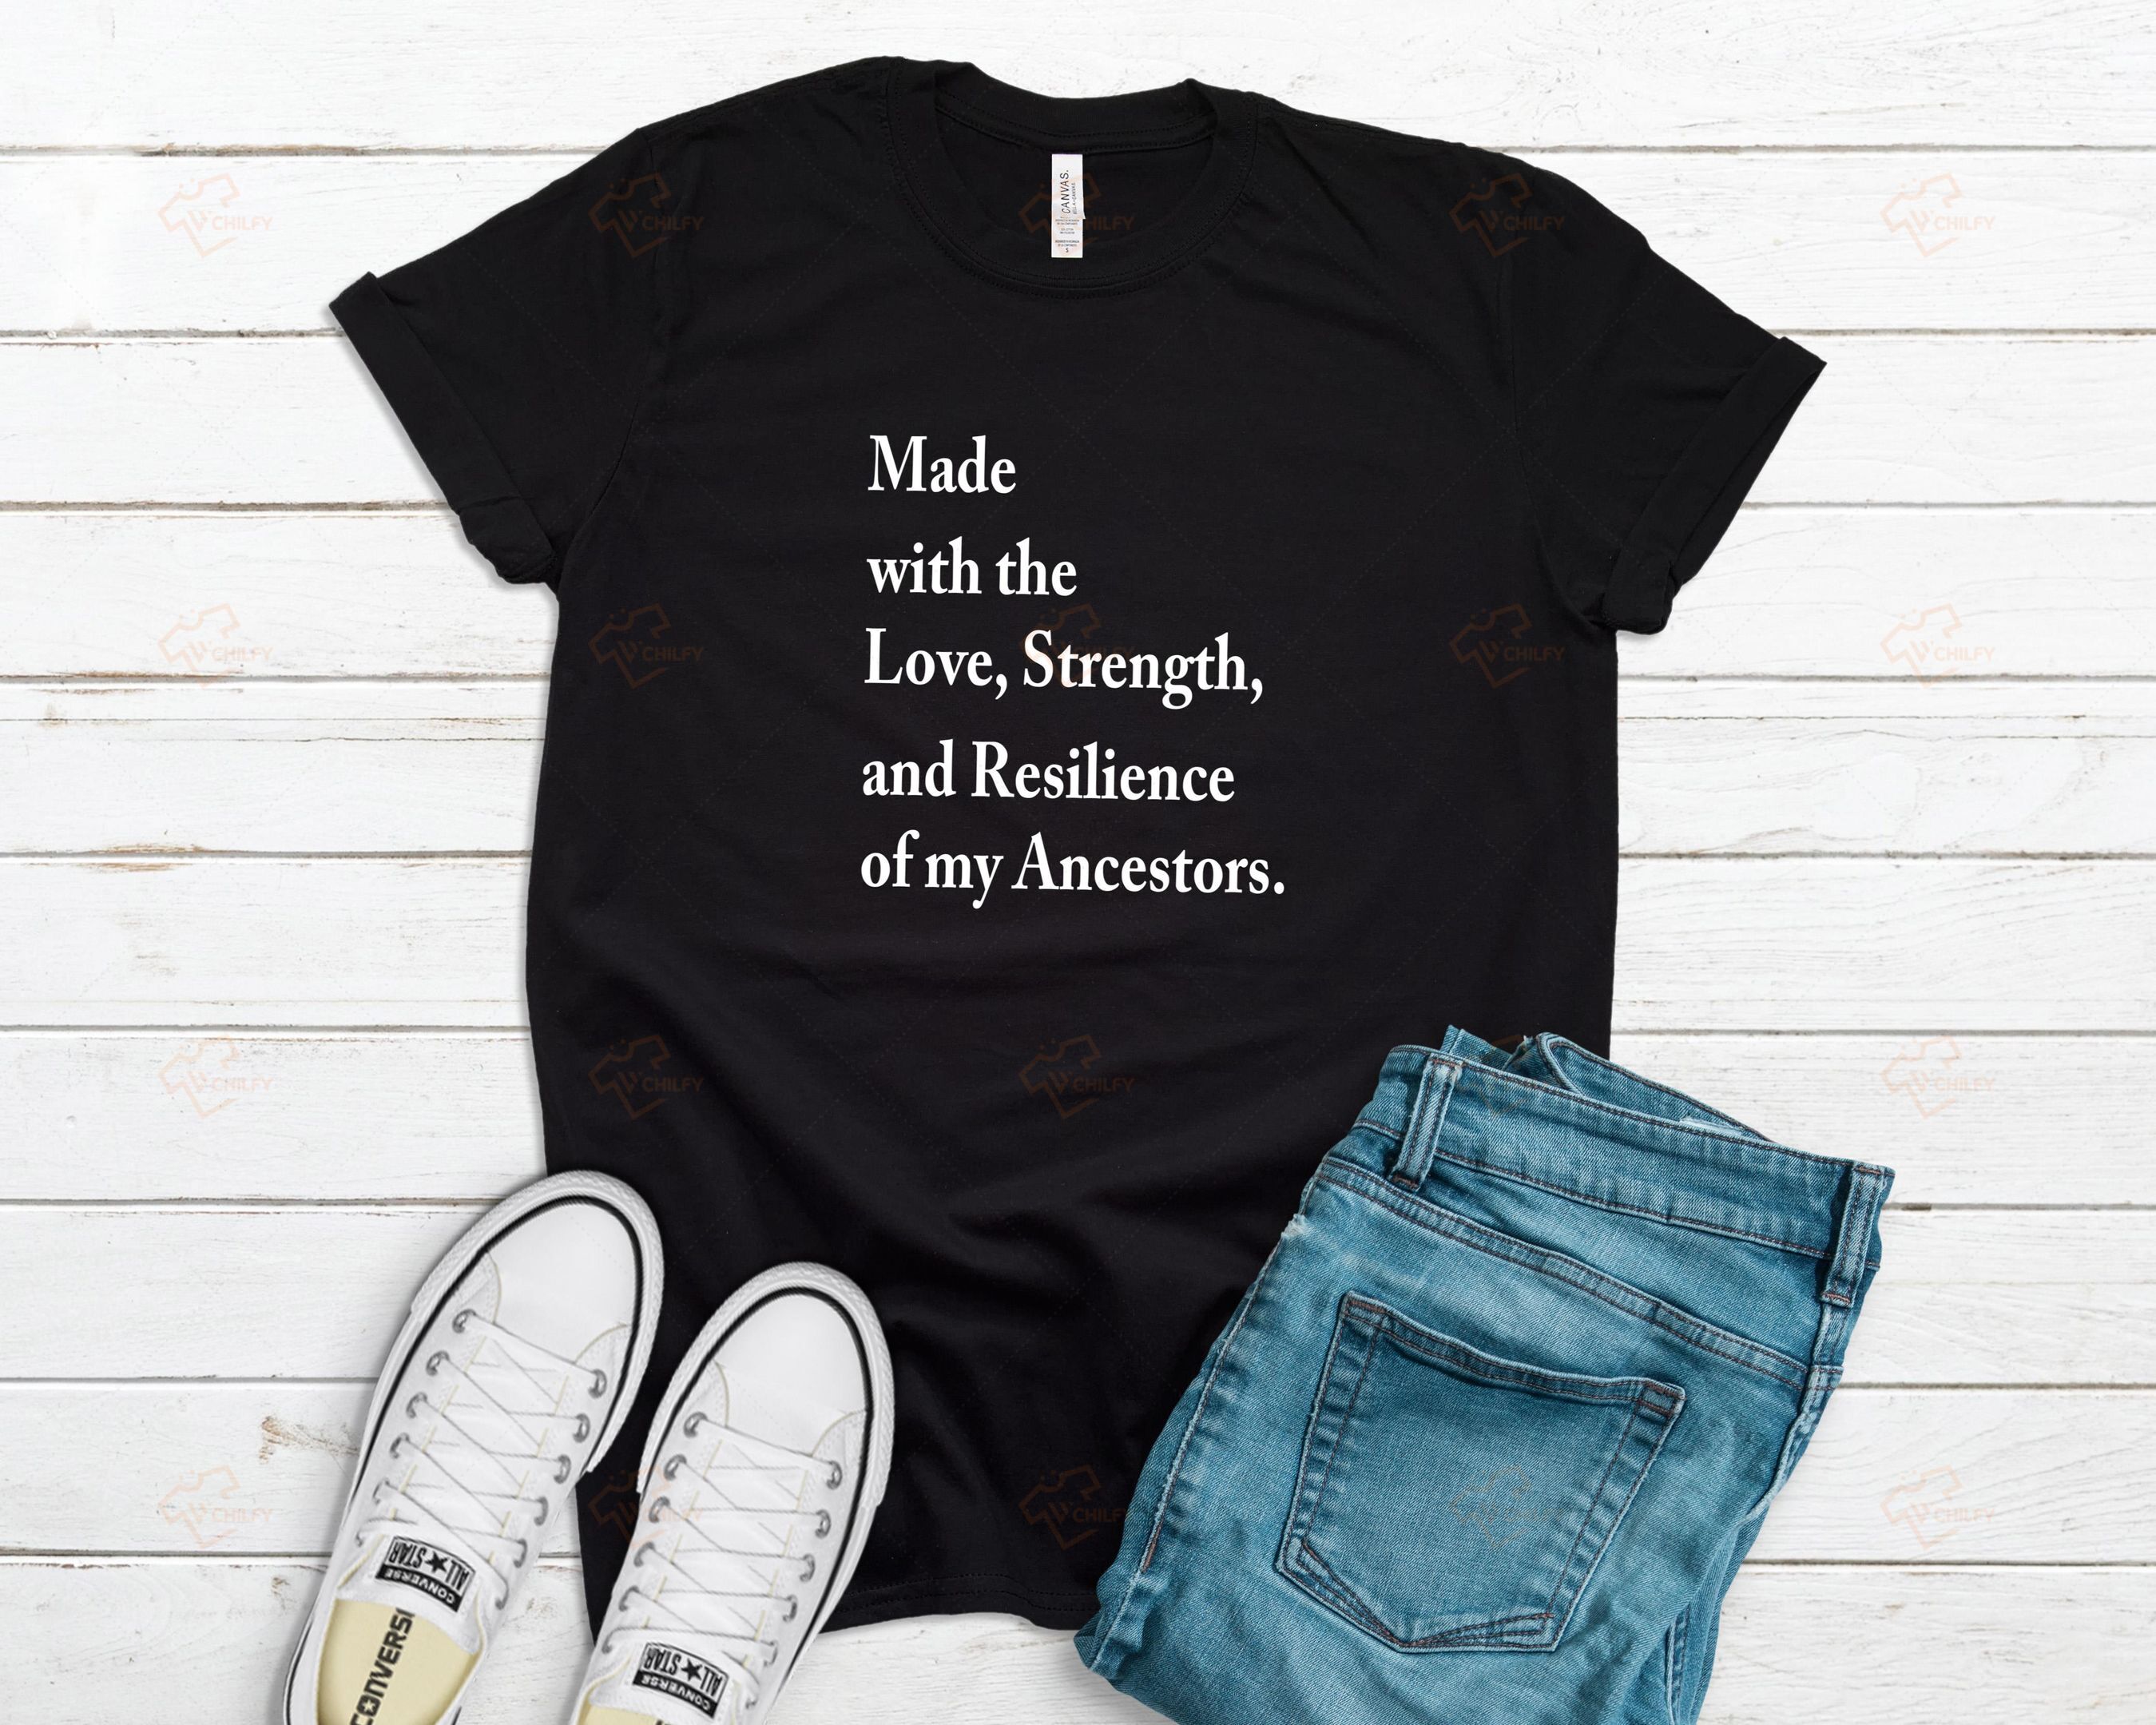 Made With The Love, Strength, And Resilience Of My Ancestor Shirt, Native Shirt, Native Pride Shirt